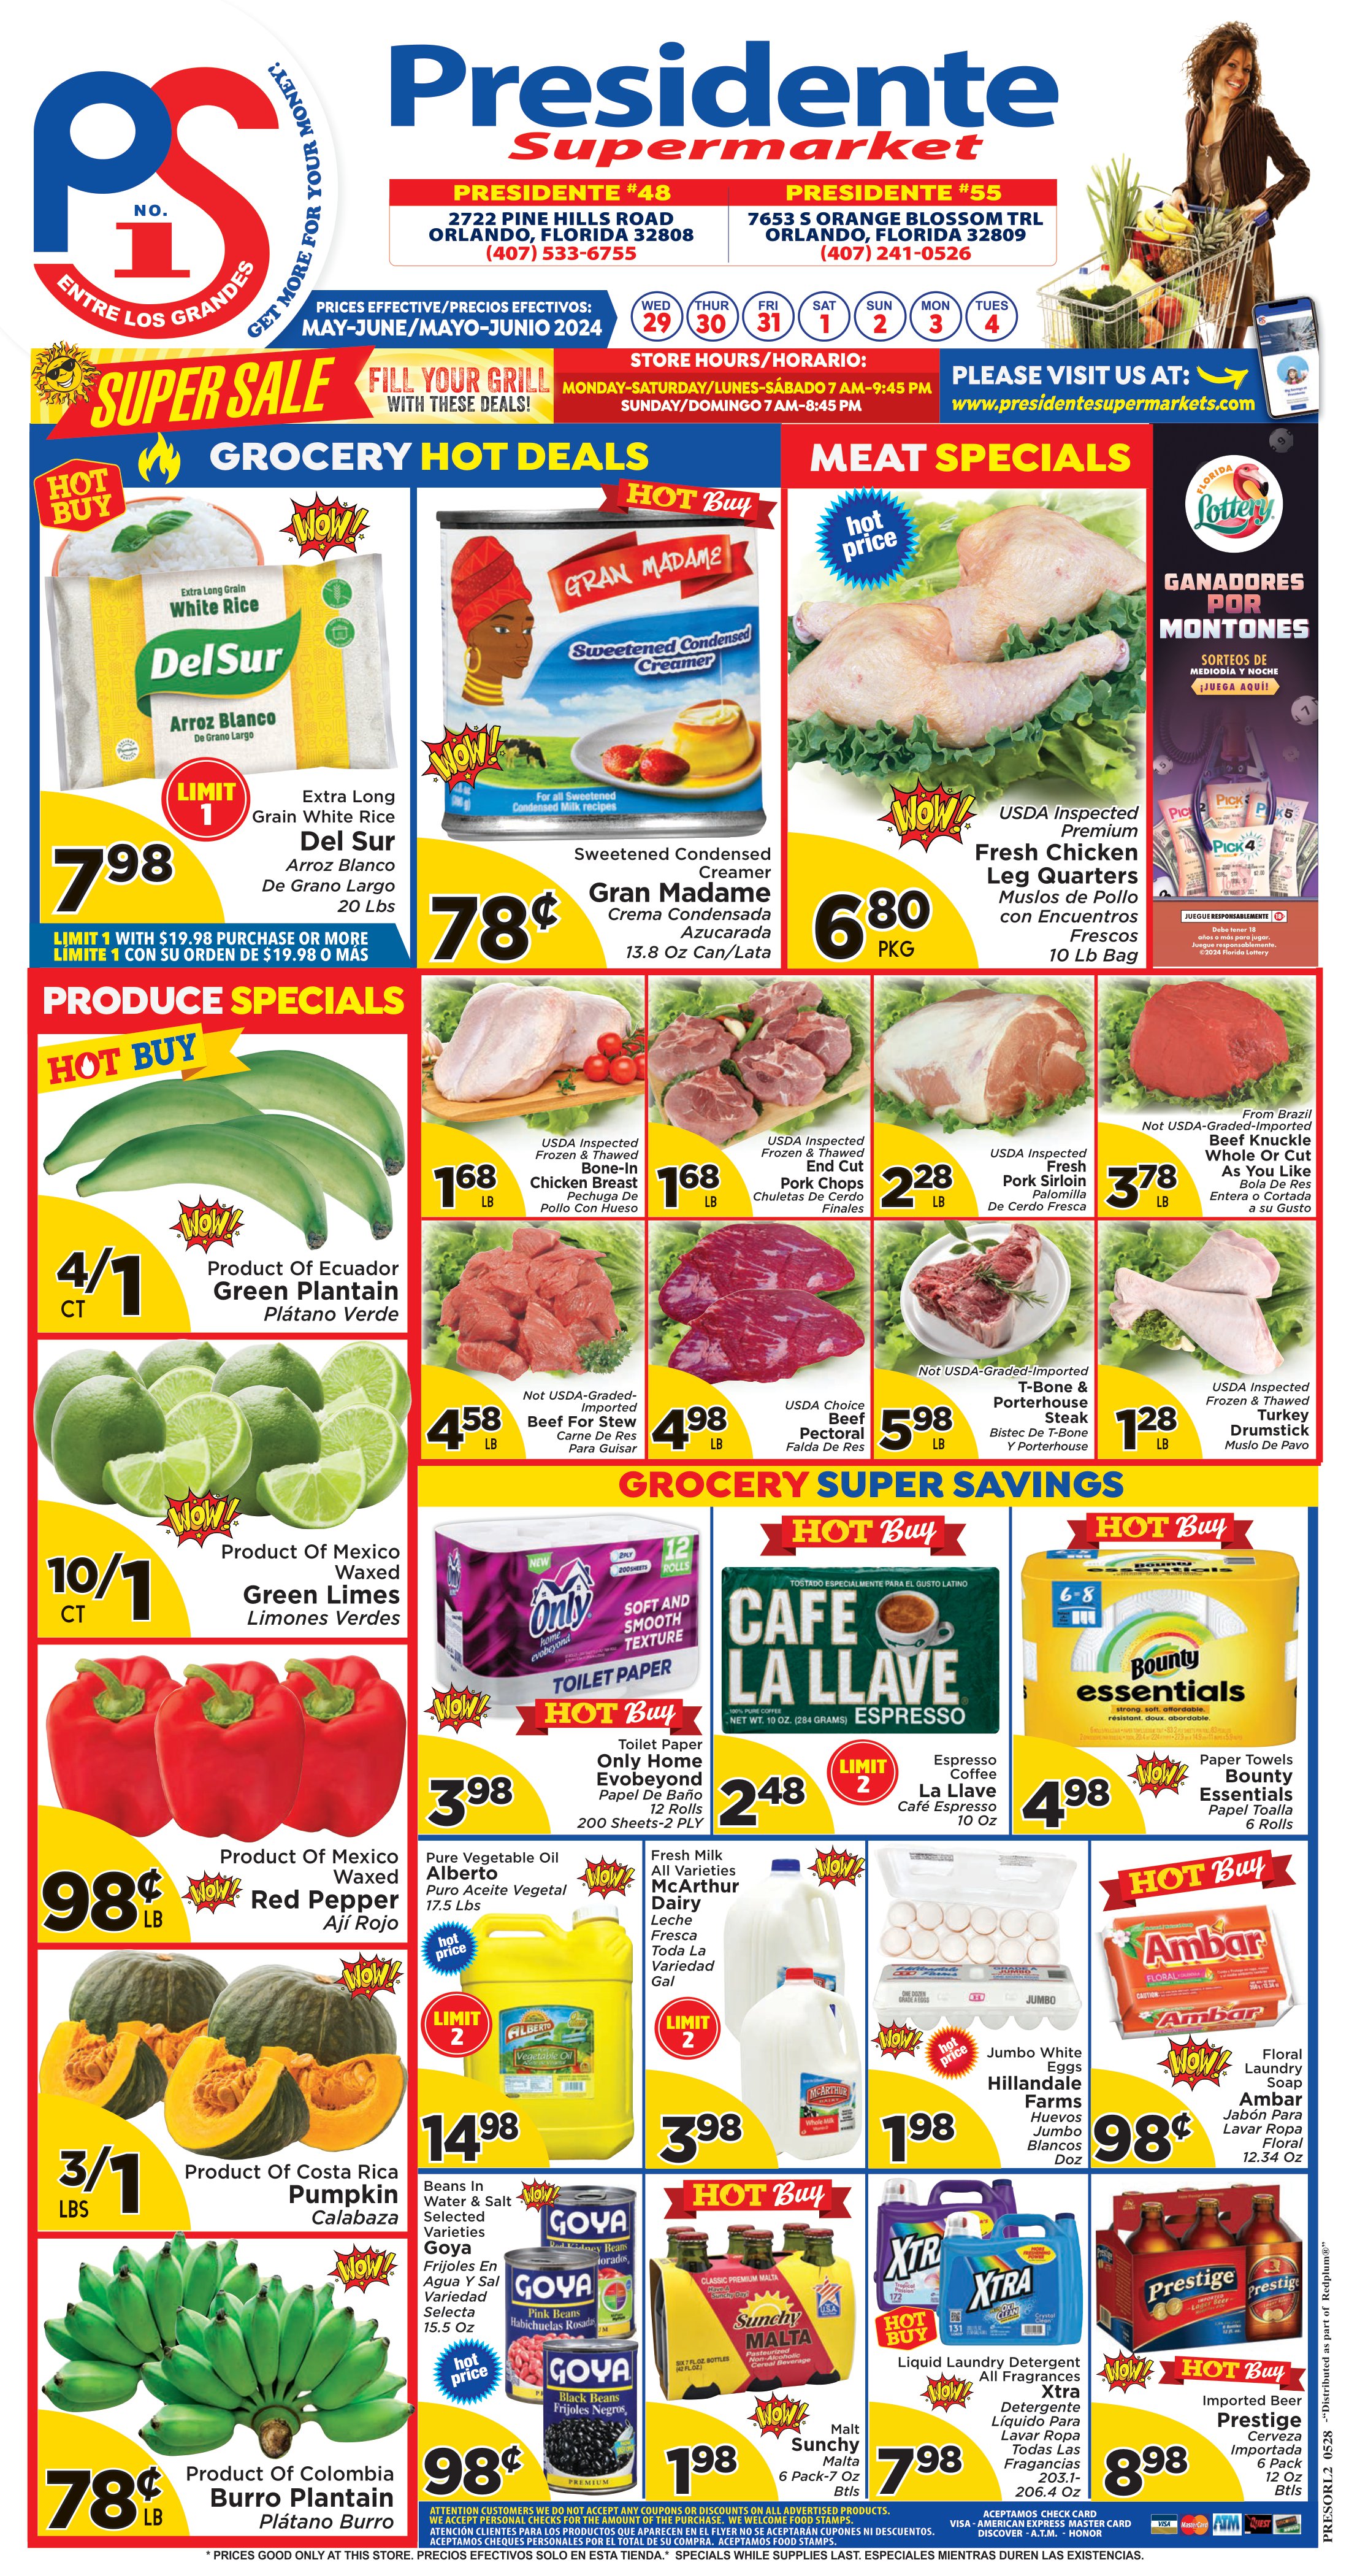 Presidente Supermarket - Weekly Promo for Store 48 - Page 1